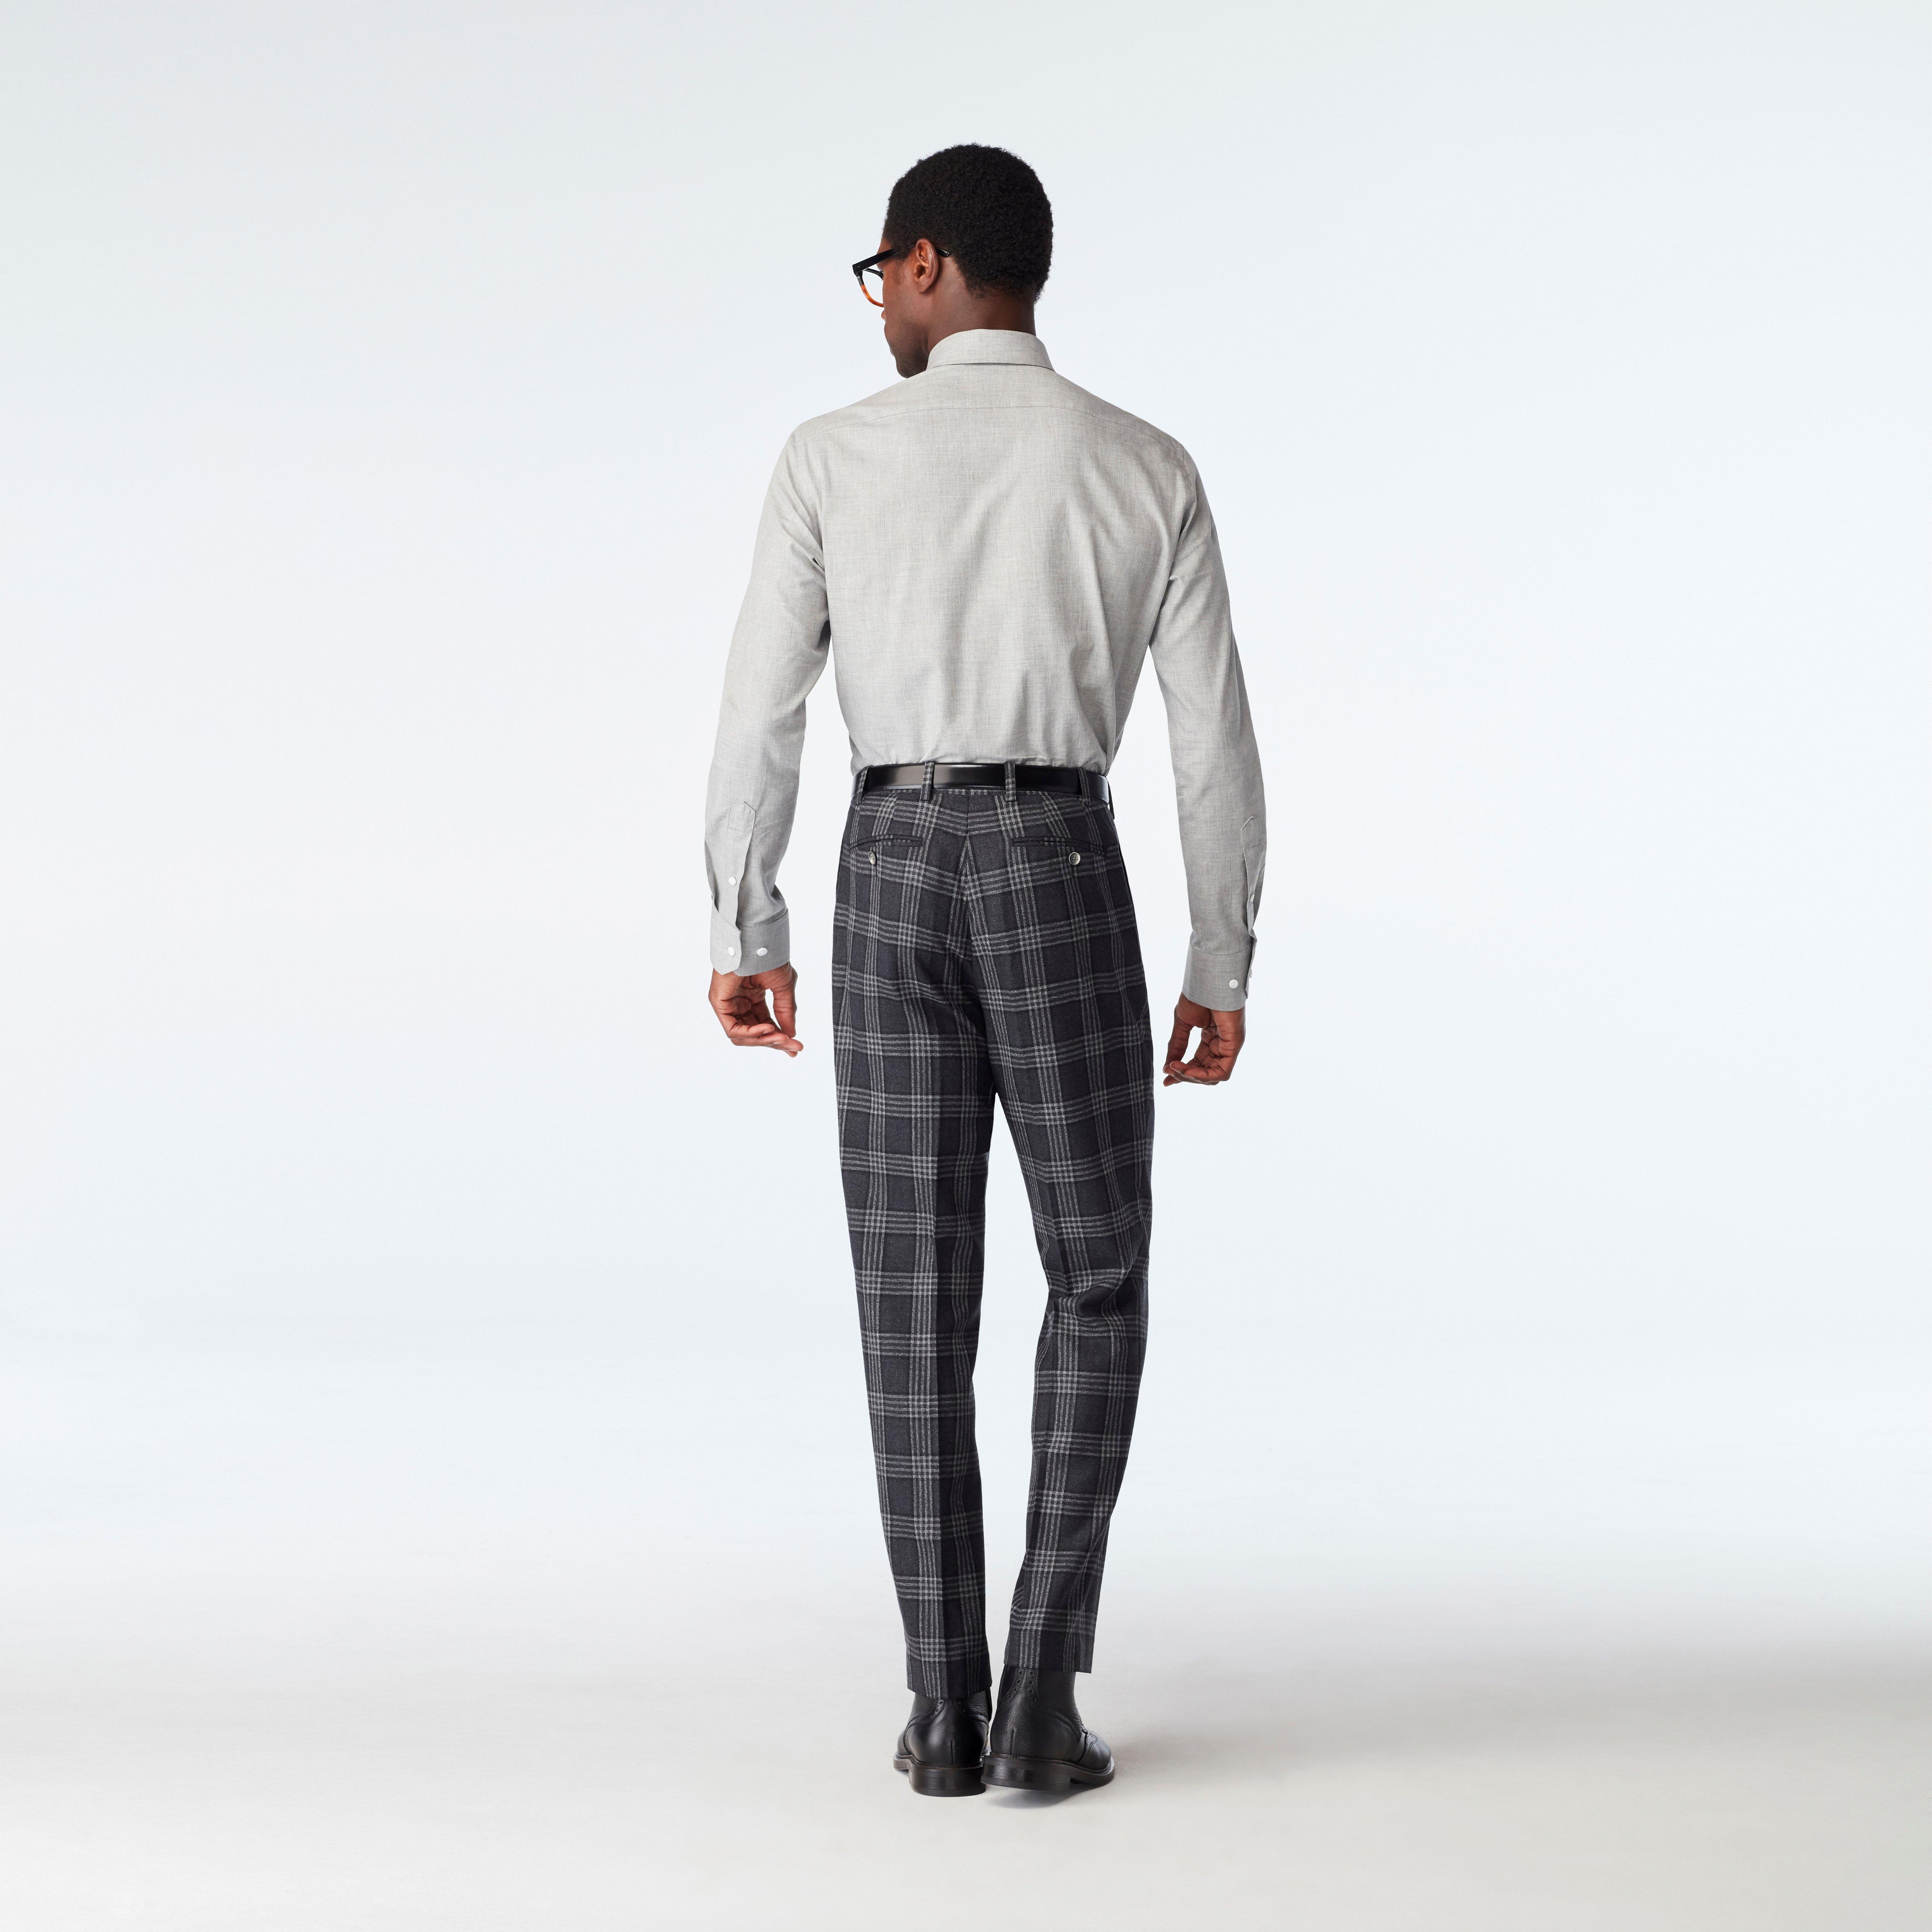 Custom Suits Made For You - Deerhurst Check Charcoal Suit | INDOCHINO